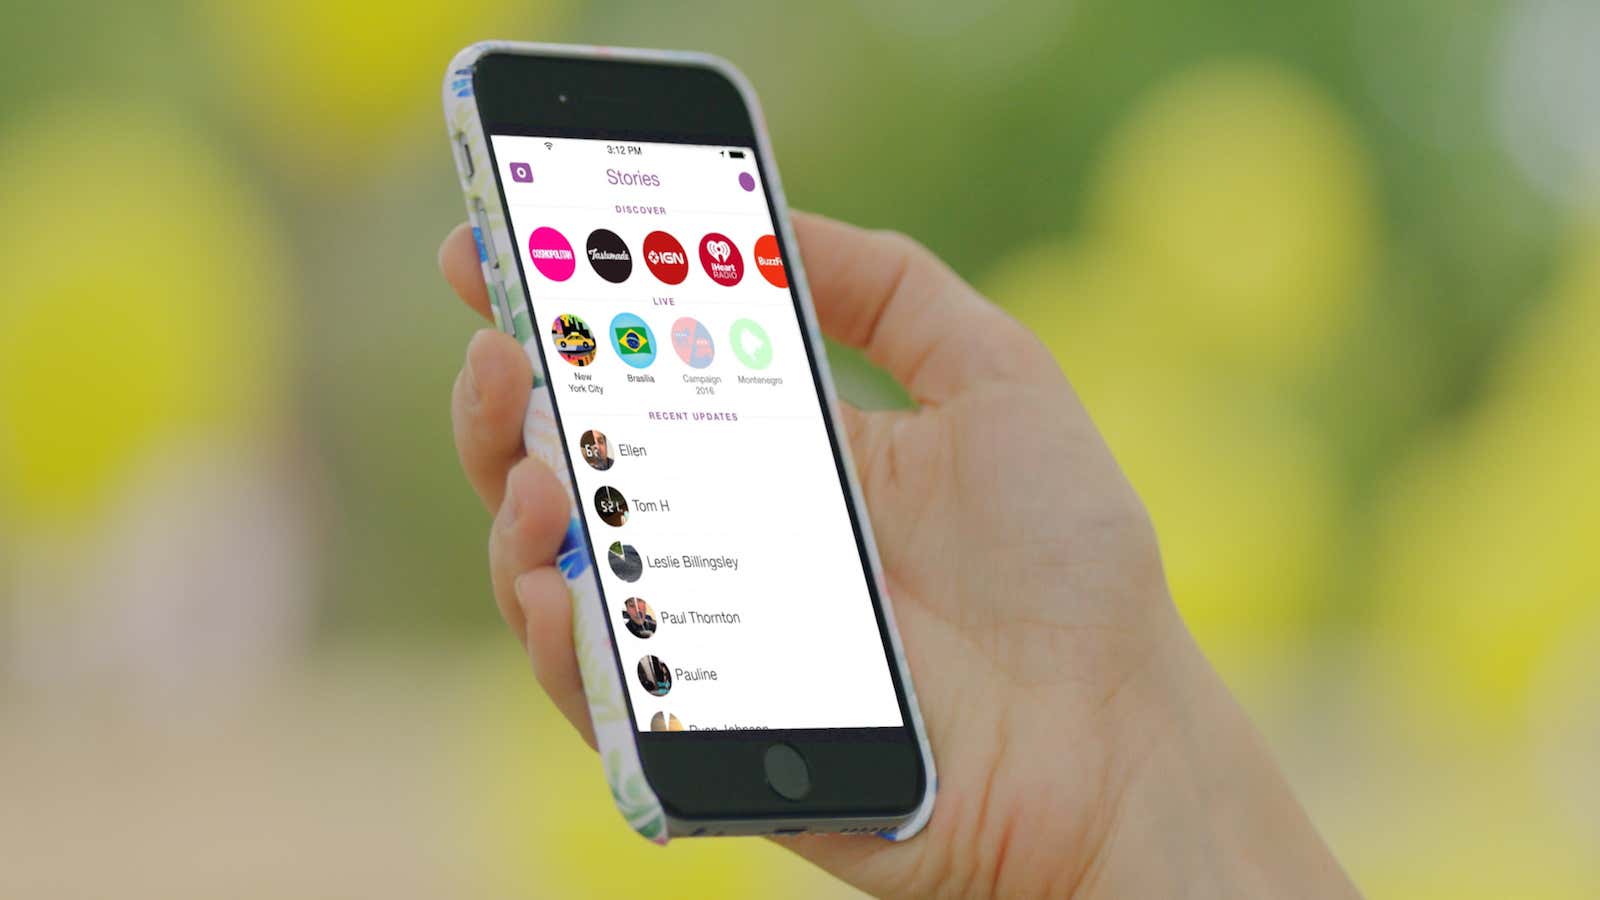 Snapchat wants to make its Live Stories feature a bit better.